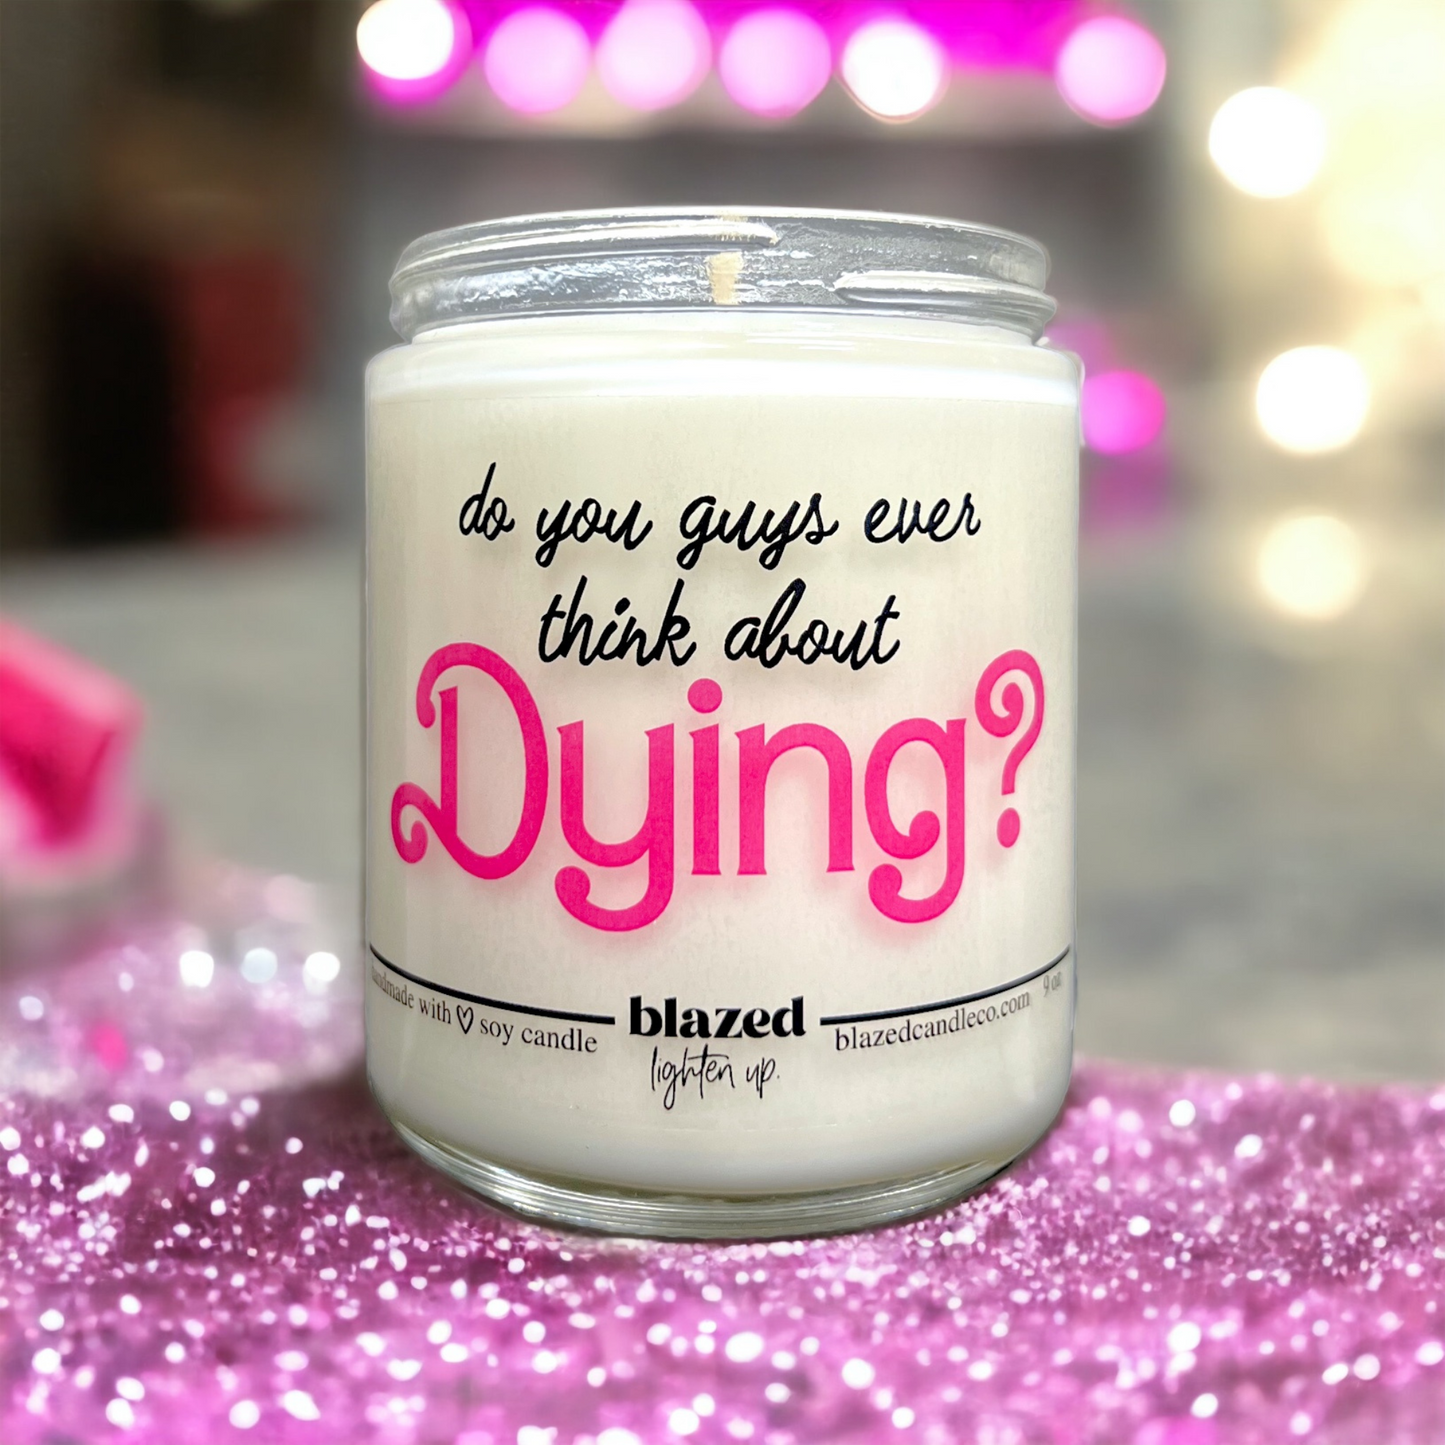 Do You Guys Ever Think About Dying? - Barbie Candle